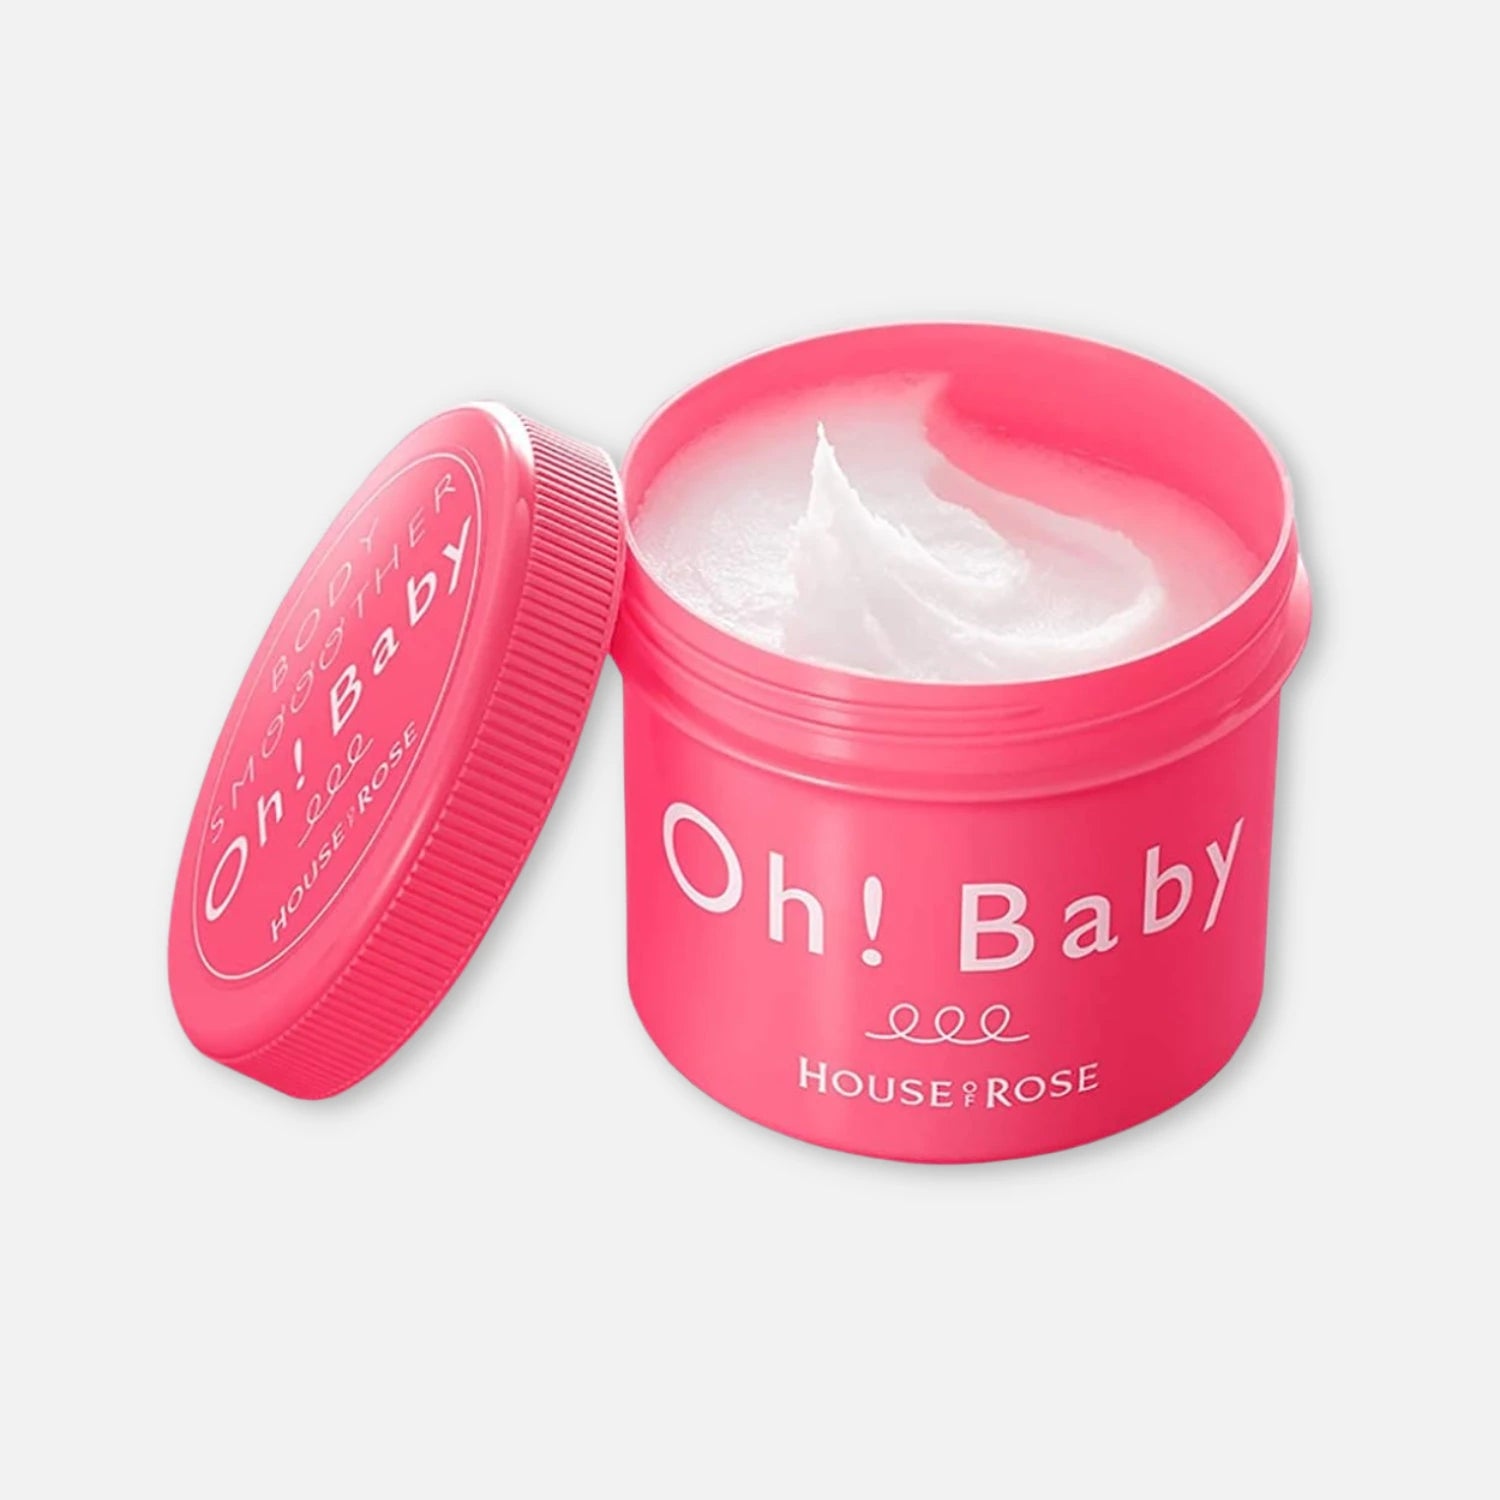 House Of Rose Oh! Baby Body Scrub Smoother Cream 570g - Buy Me Japan